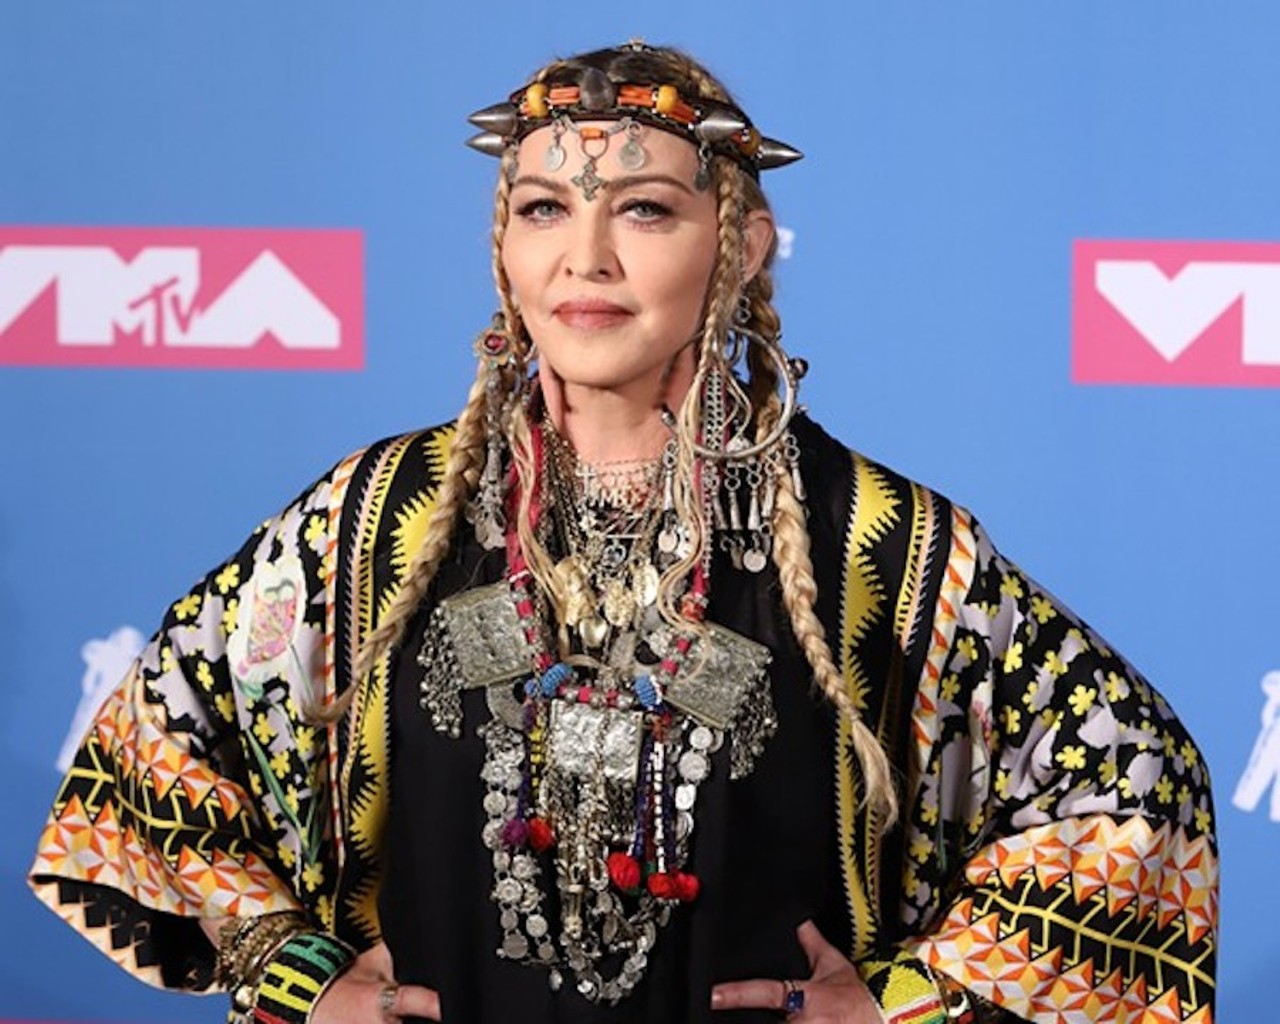 July
Material girl: Provocative pop star Madonna was once again censored &#151; this time for sharing a debunked viral video on her Instagram account. Though Bay City native Madonna could&#146;ve landed herself a Dooby for any number of malfeasance, (like calling COVID-19 &#147;the great equalizer&#148; during a flower-petal bath or having her son David &#147;dance away racism&#148; by dancing to alleged pedophile Michael Jackson's &#147;They Don't Care About Us&#148; to &#147;honor&#148; George Floyd), it was her flagged Instagram post that featured the video of Houston disinformation doctor Stella Immanuel, who claimed that the drug hydroxychloroquine is a proven cure for COVID-19. "They would rather let fear control the people and let the rich get richer and the poor get poorer," Madonna wrote in the video's caption, while also calling Immanuel her "hero." Instagram soon censored Madonna's post, blurring it out and marking it as "false information" flagged by independent fact-checkers. The app also provided a link to a page that debunks the claims in the video. Madonna eventually deleted the post altogether.
Photo via JStone/Shutterstock.com